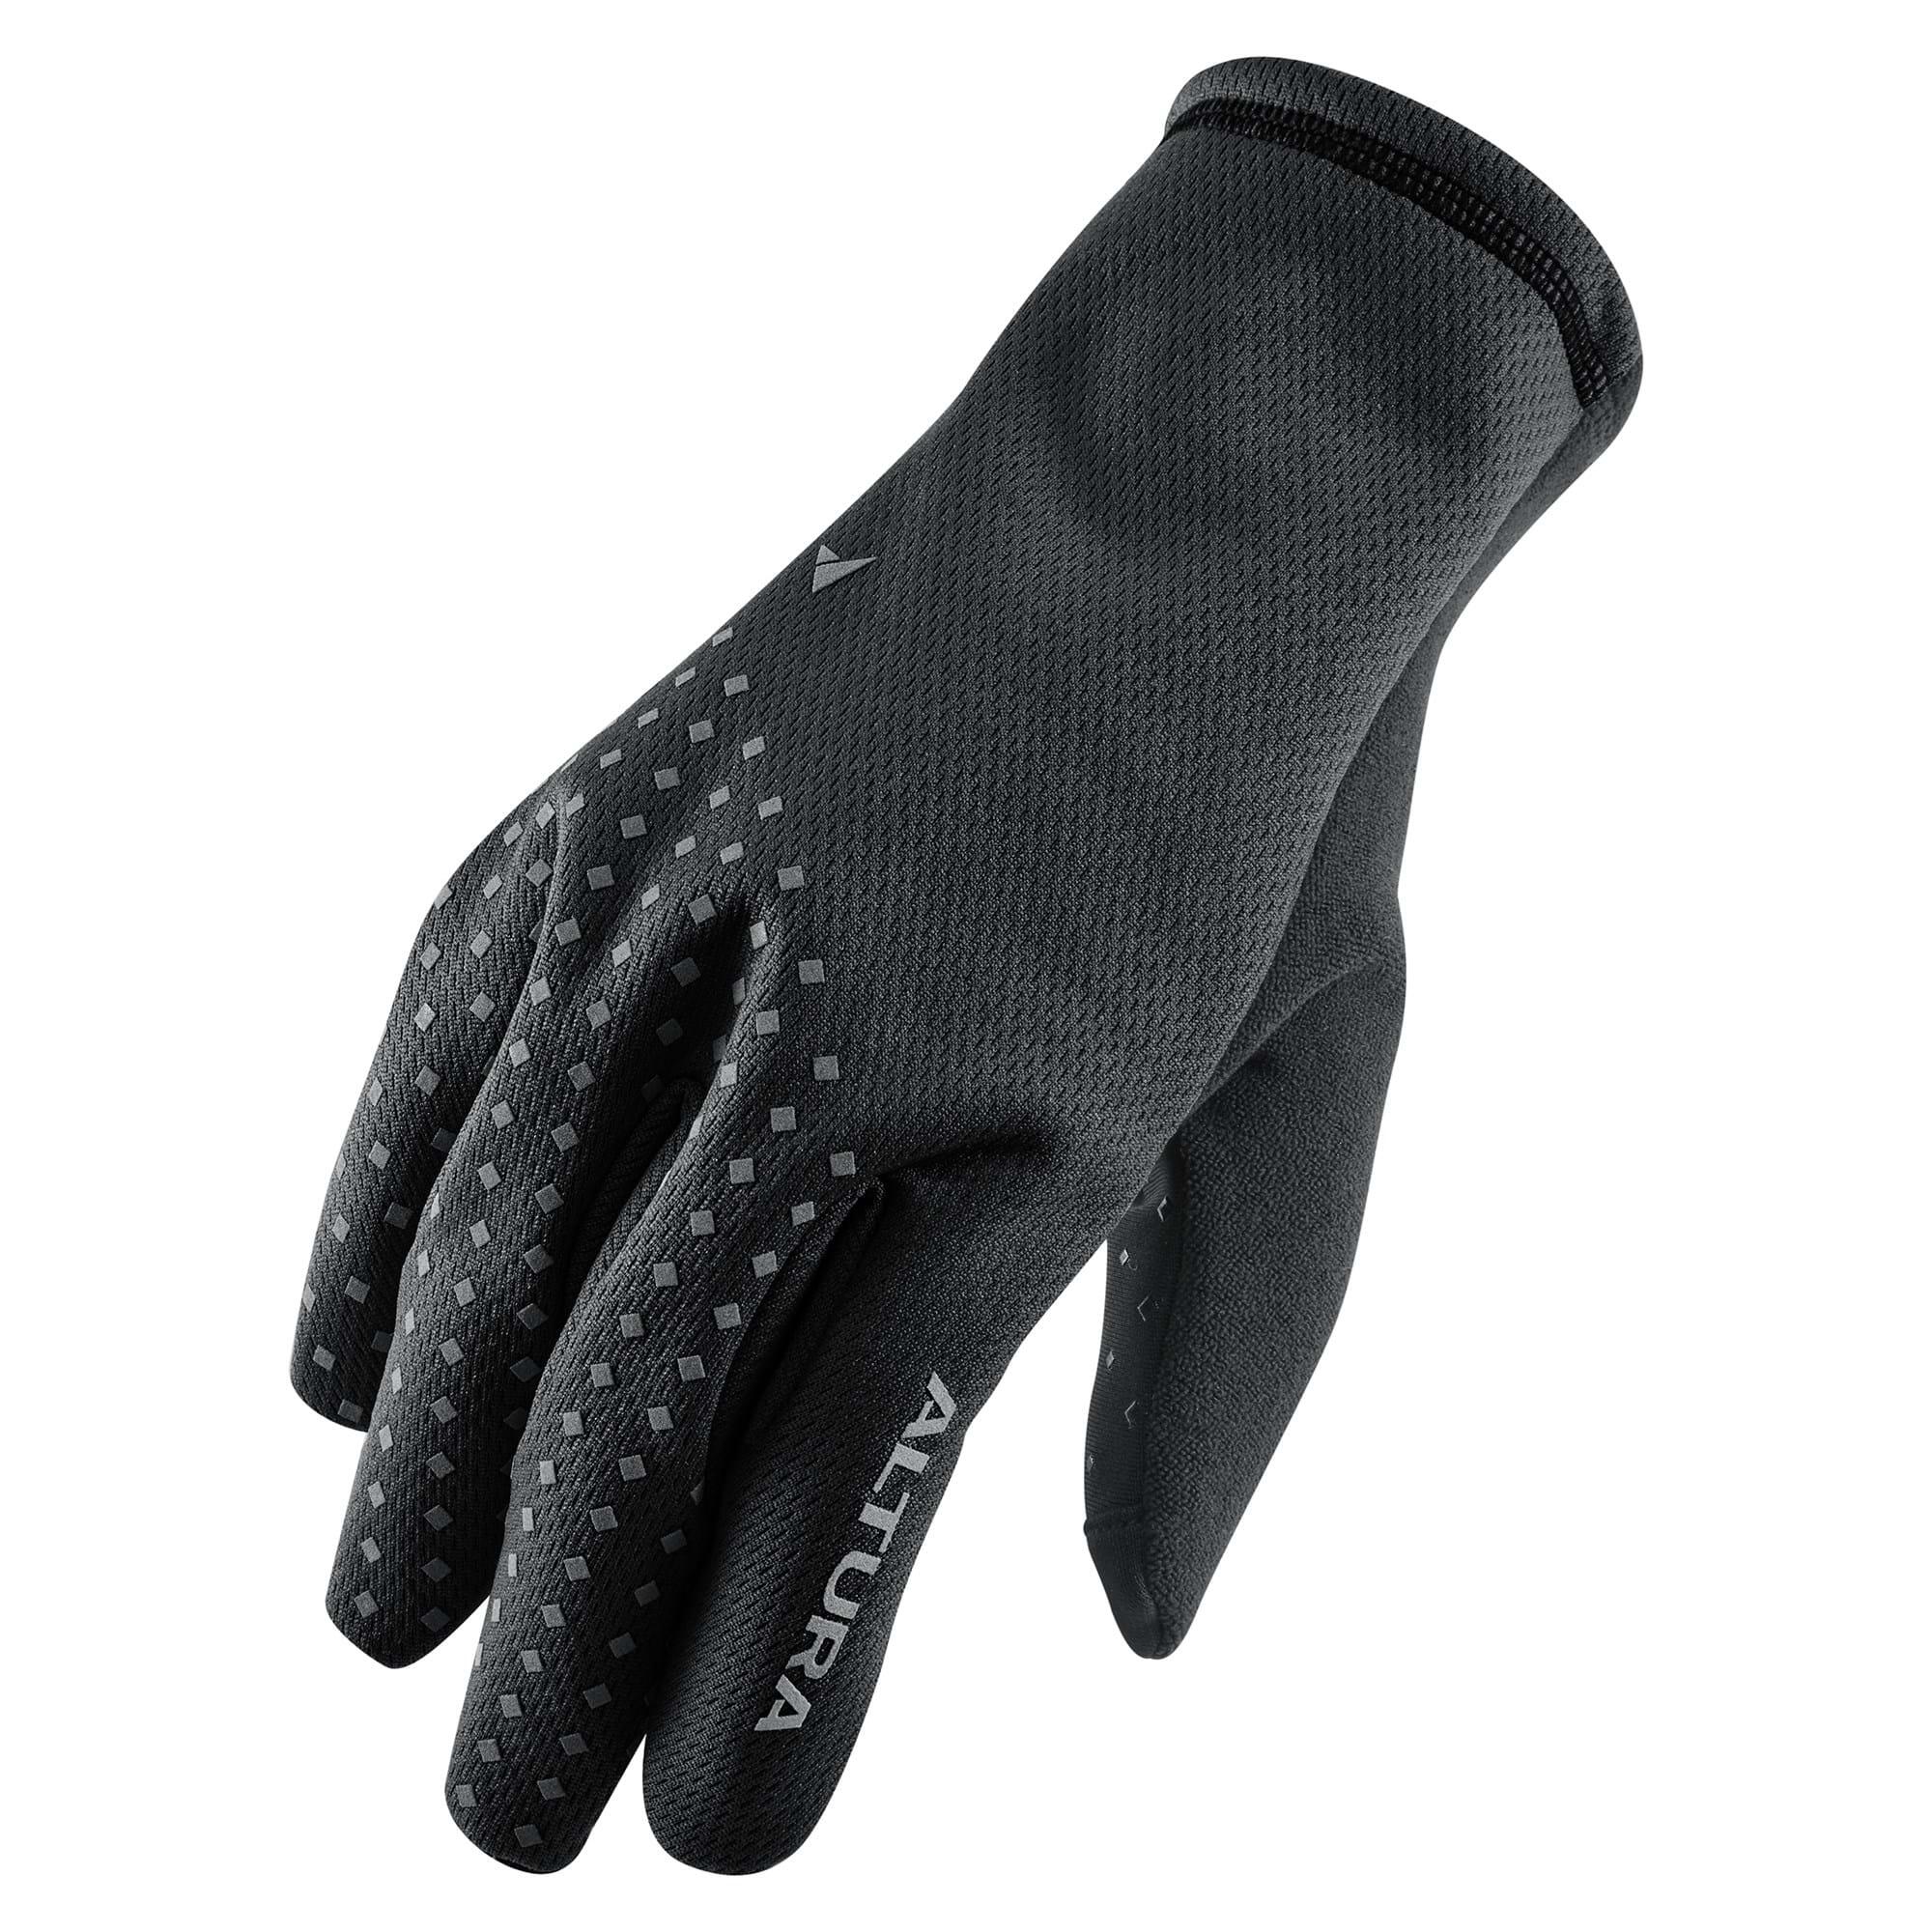 Nightvision Unisex Windproof Fleece Cycling Gloves 1/7